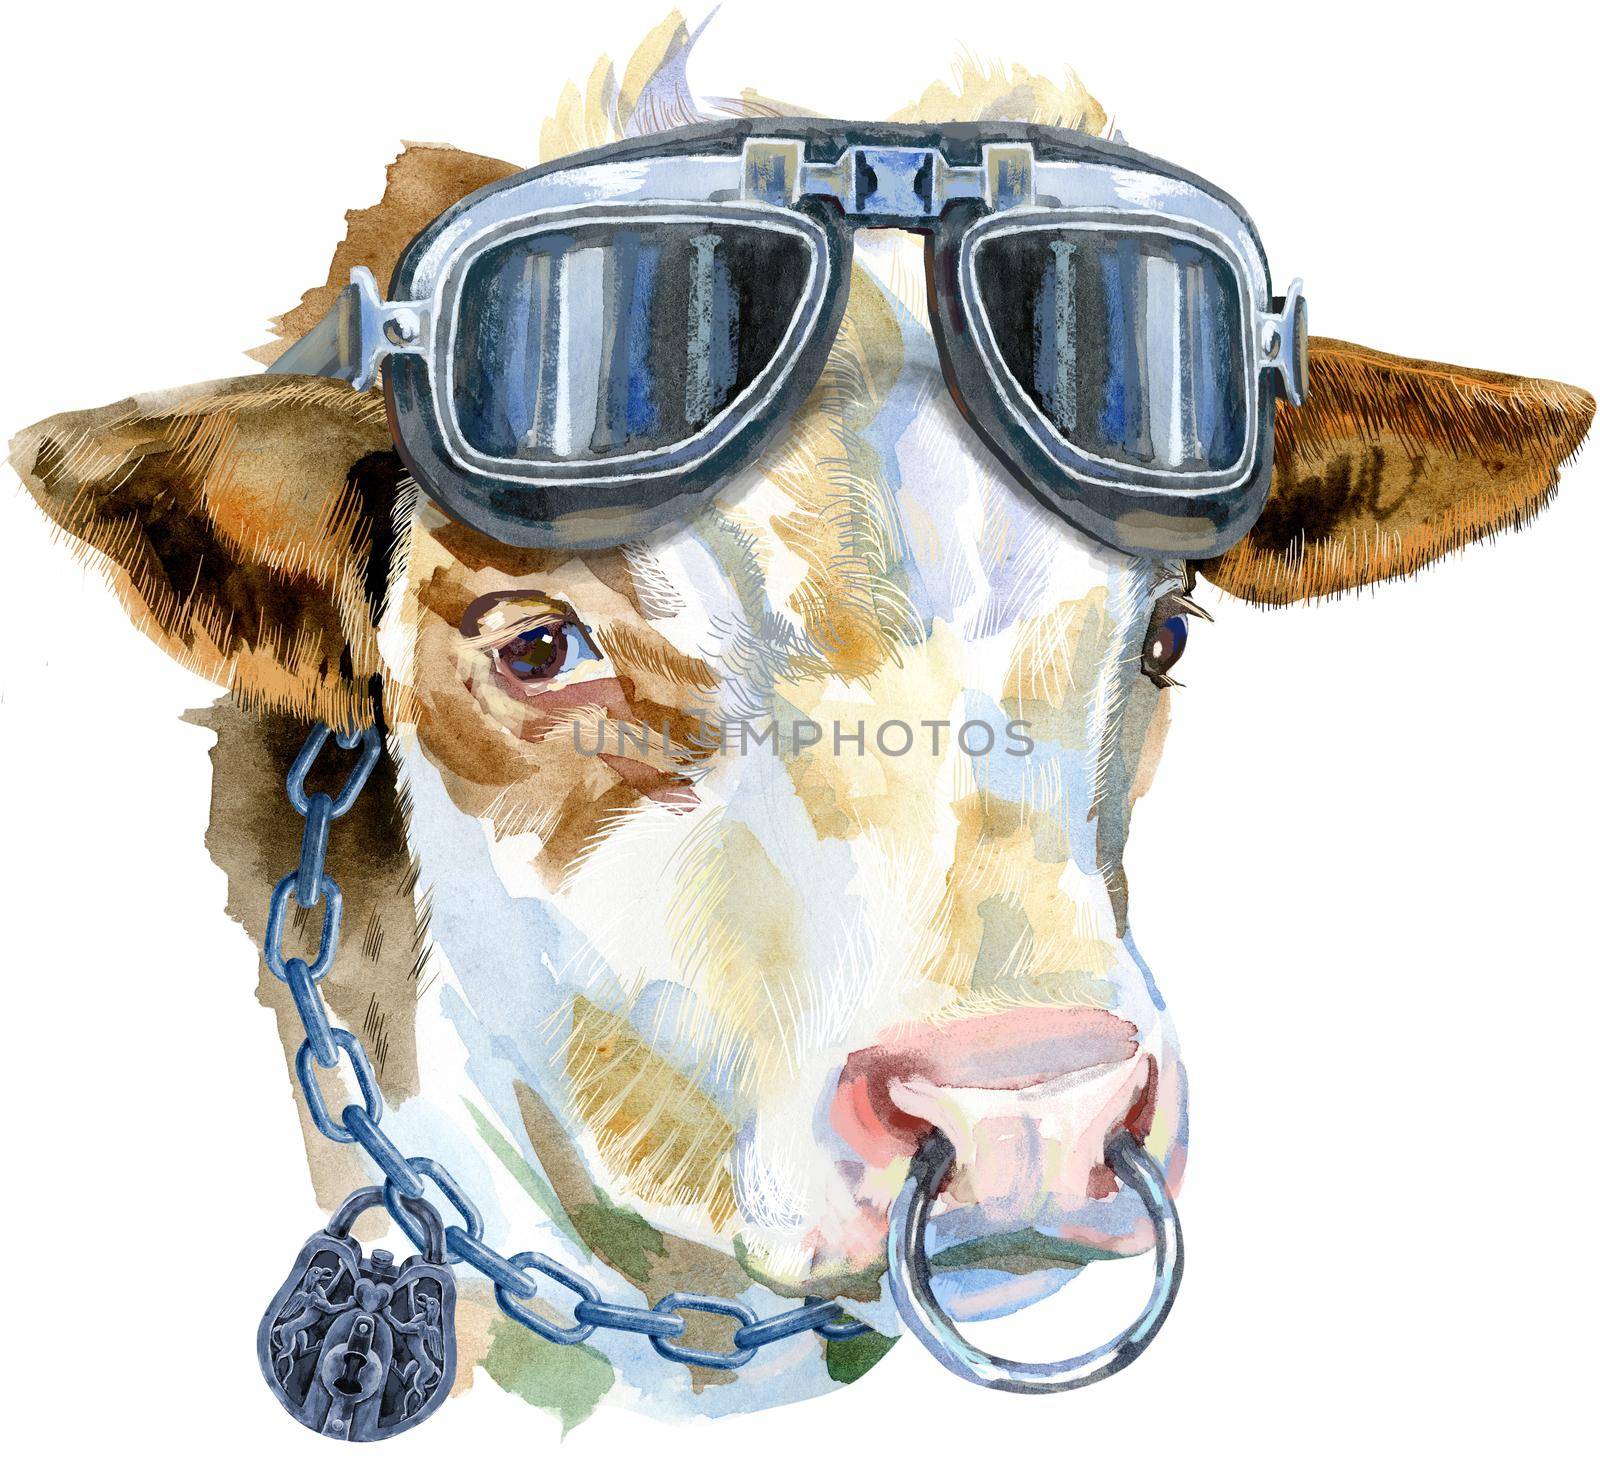 Bull watercolor graphics. Bull with biker glasses. Animal illustration watercolor textured background.